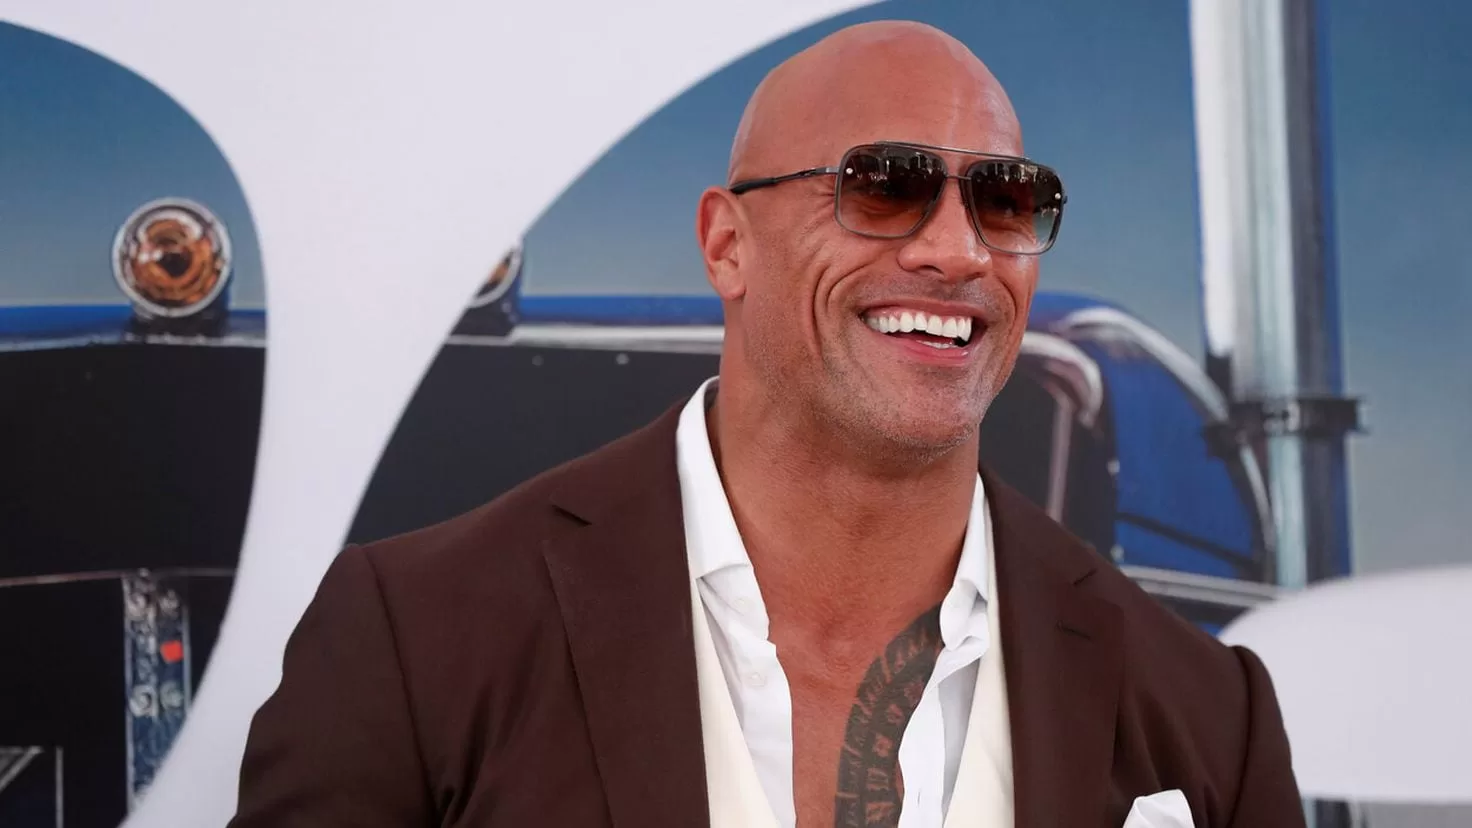 Dwayne Johnson says several political parties asked him to run for president
